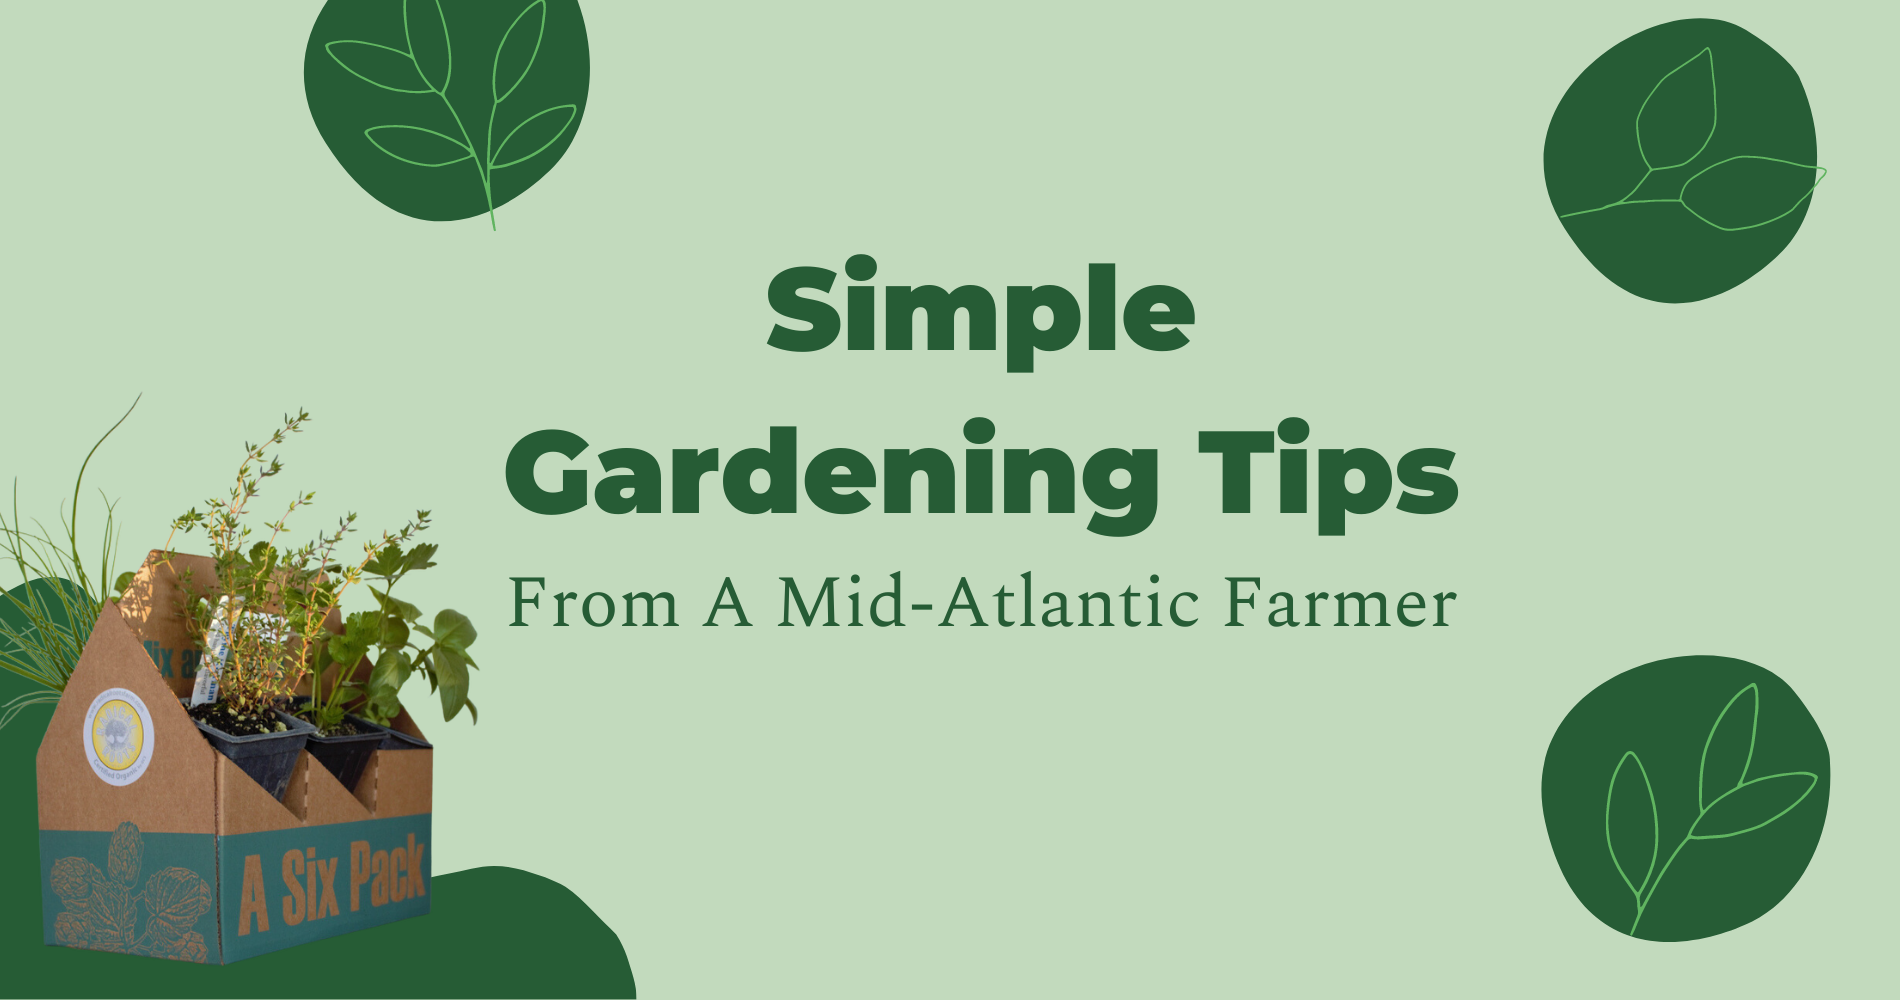 Simple Gardening Tips From A Mid-Atlantic Farmer image